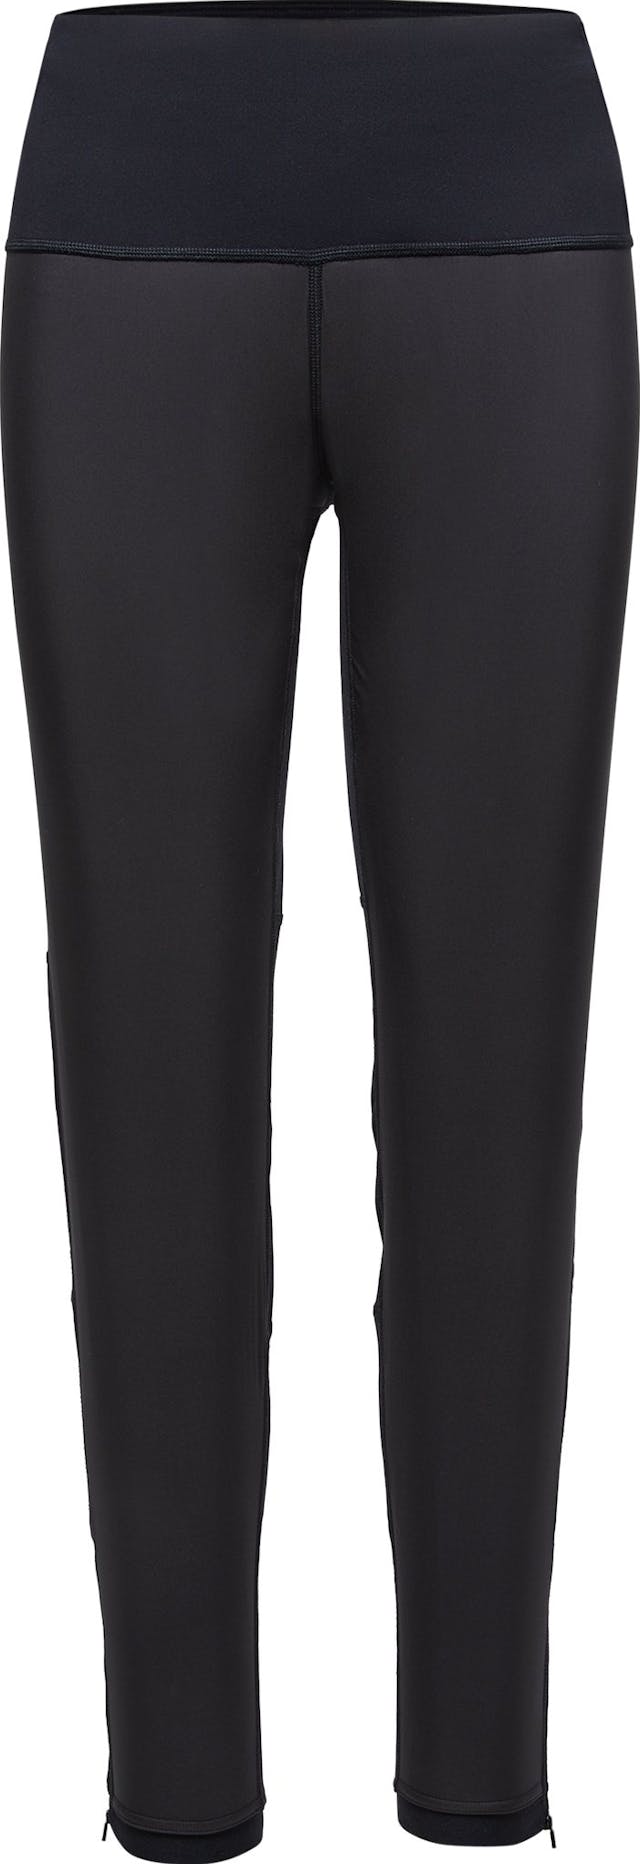 Product image for Magna Polartec Pant - Women's